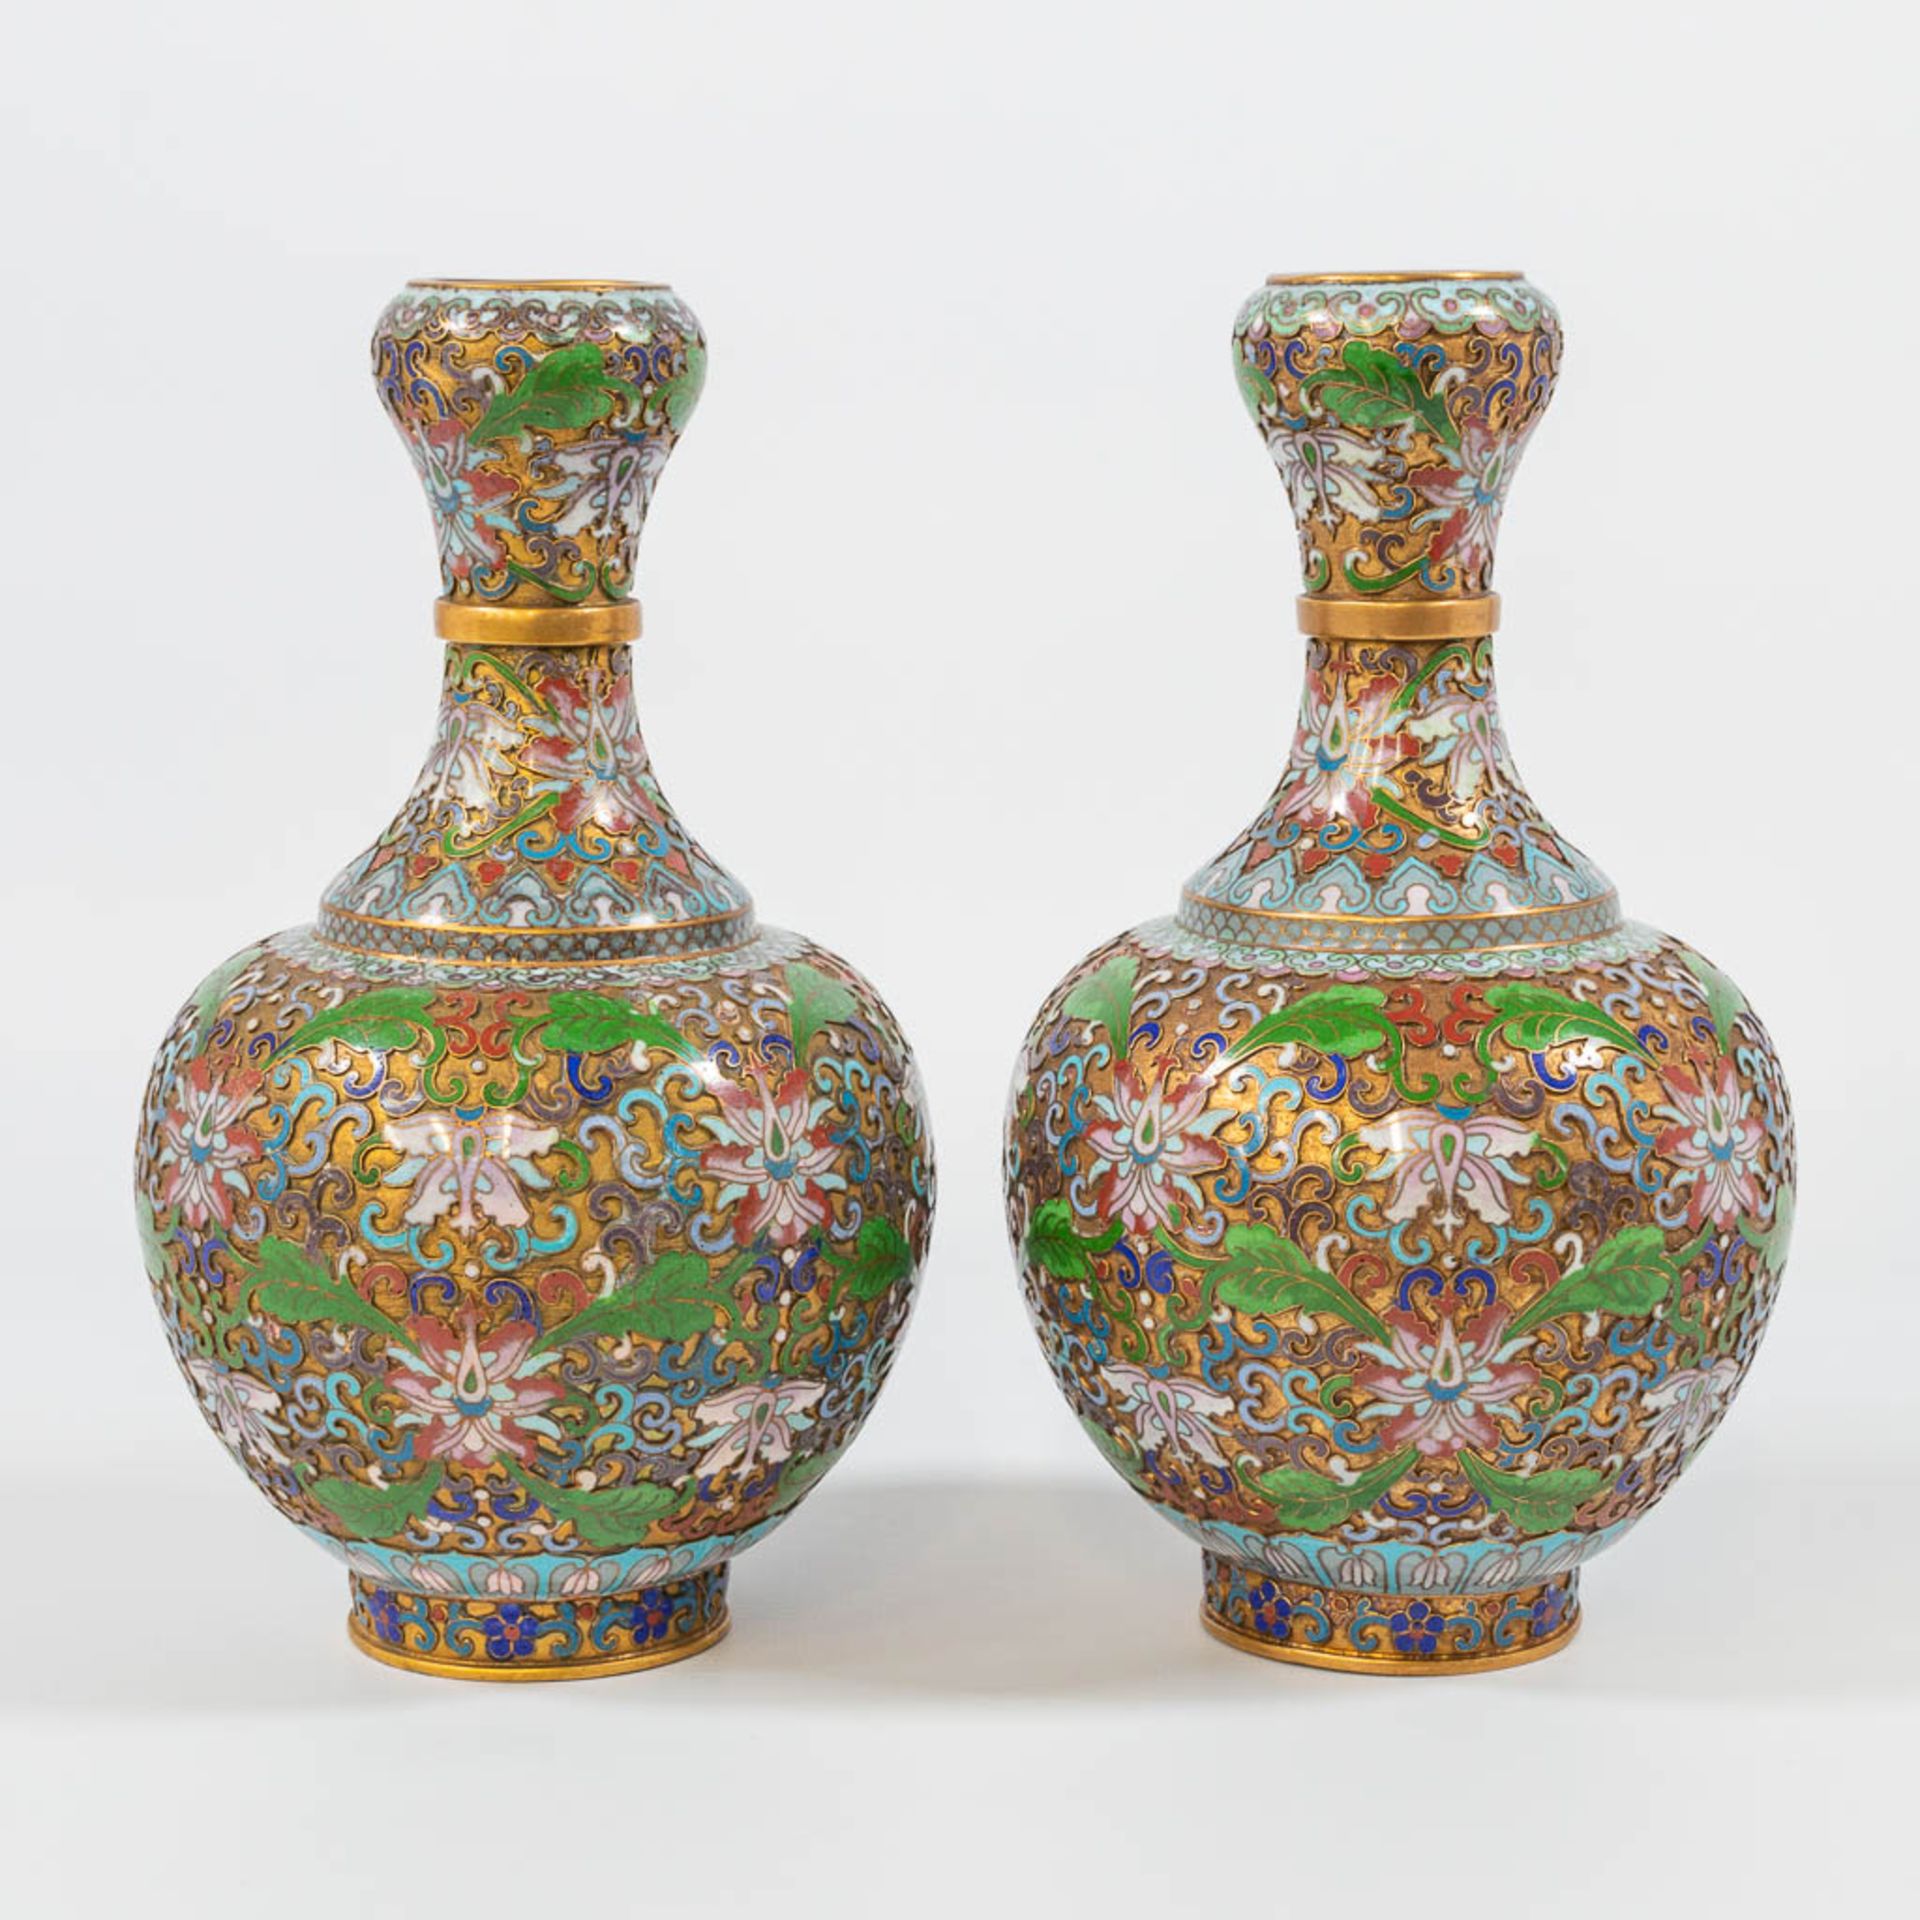 A pair of openworked Cloisonné vases, made of Bronze and enamel. - Image 6 of 17